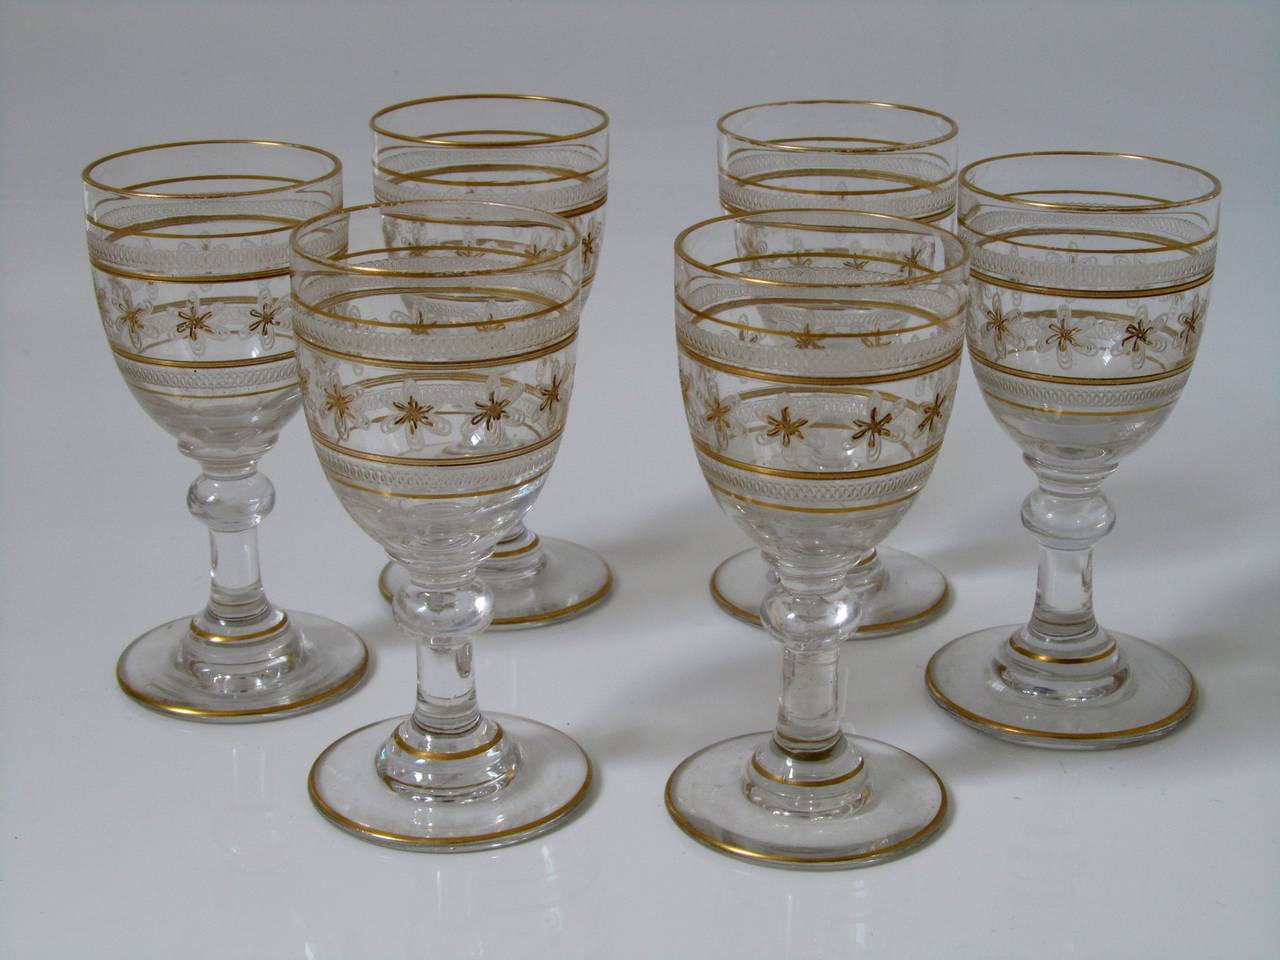 St. Louis Antique French Enamel Gold Crystal Liquor or Aperitif Service 7 pc

Antique French Saint Louis crystal liquor or aperitif service, circa 1908. Comprising of a liquor decanter and 6 cordial glasses. Fine quality crystal, patterned with